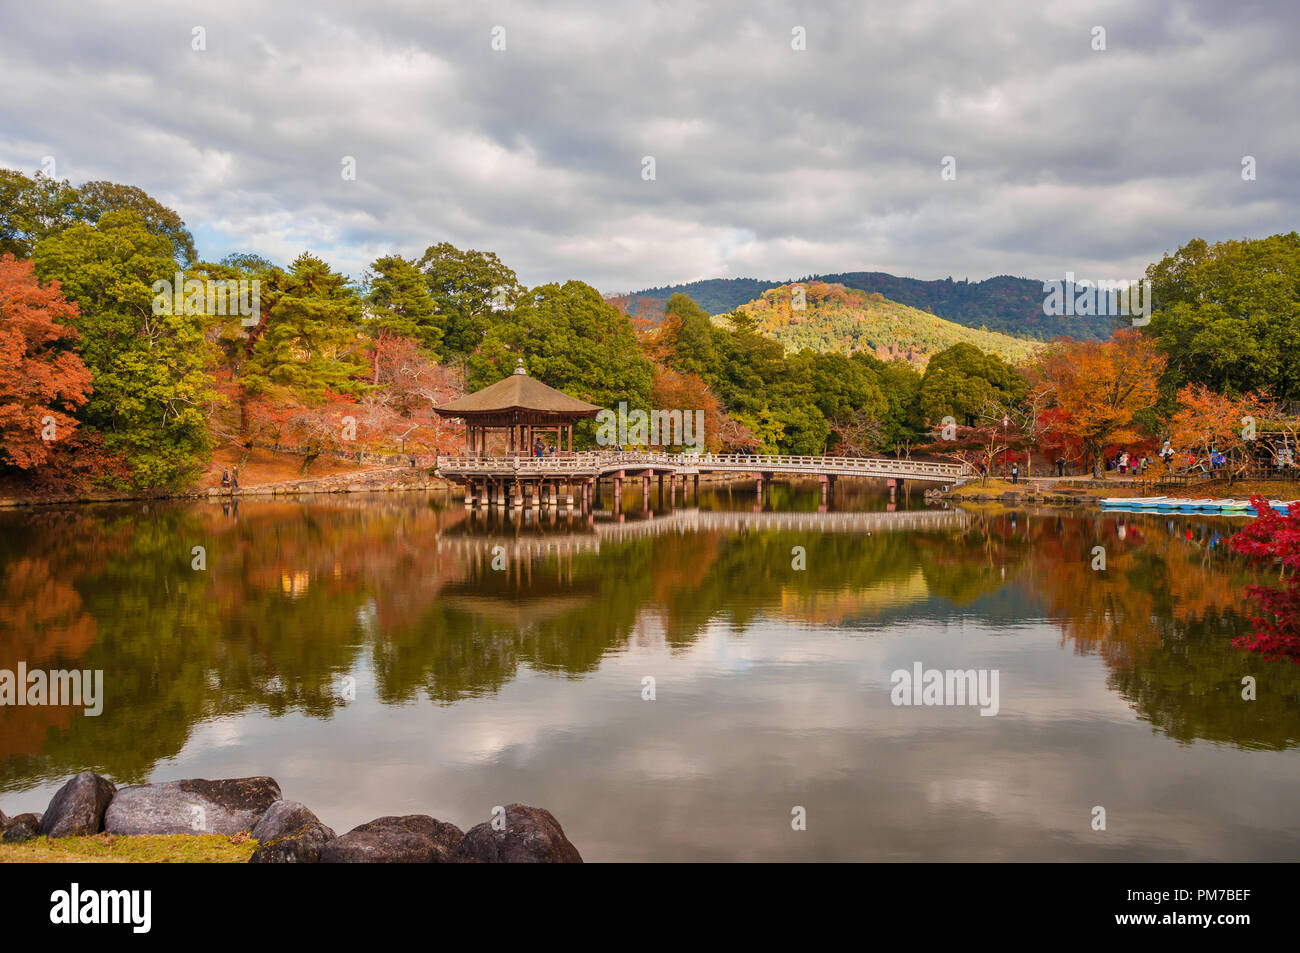 Scenic view of Nara public park in autumn, with pond and old pavilion, in Japan Stock Photo